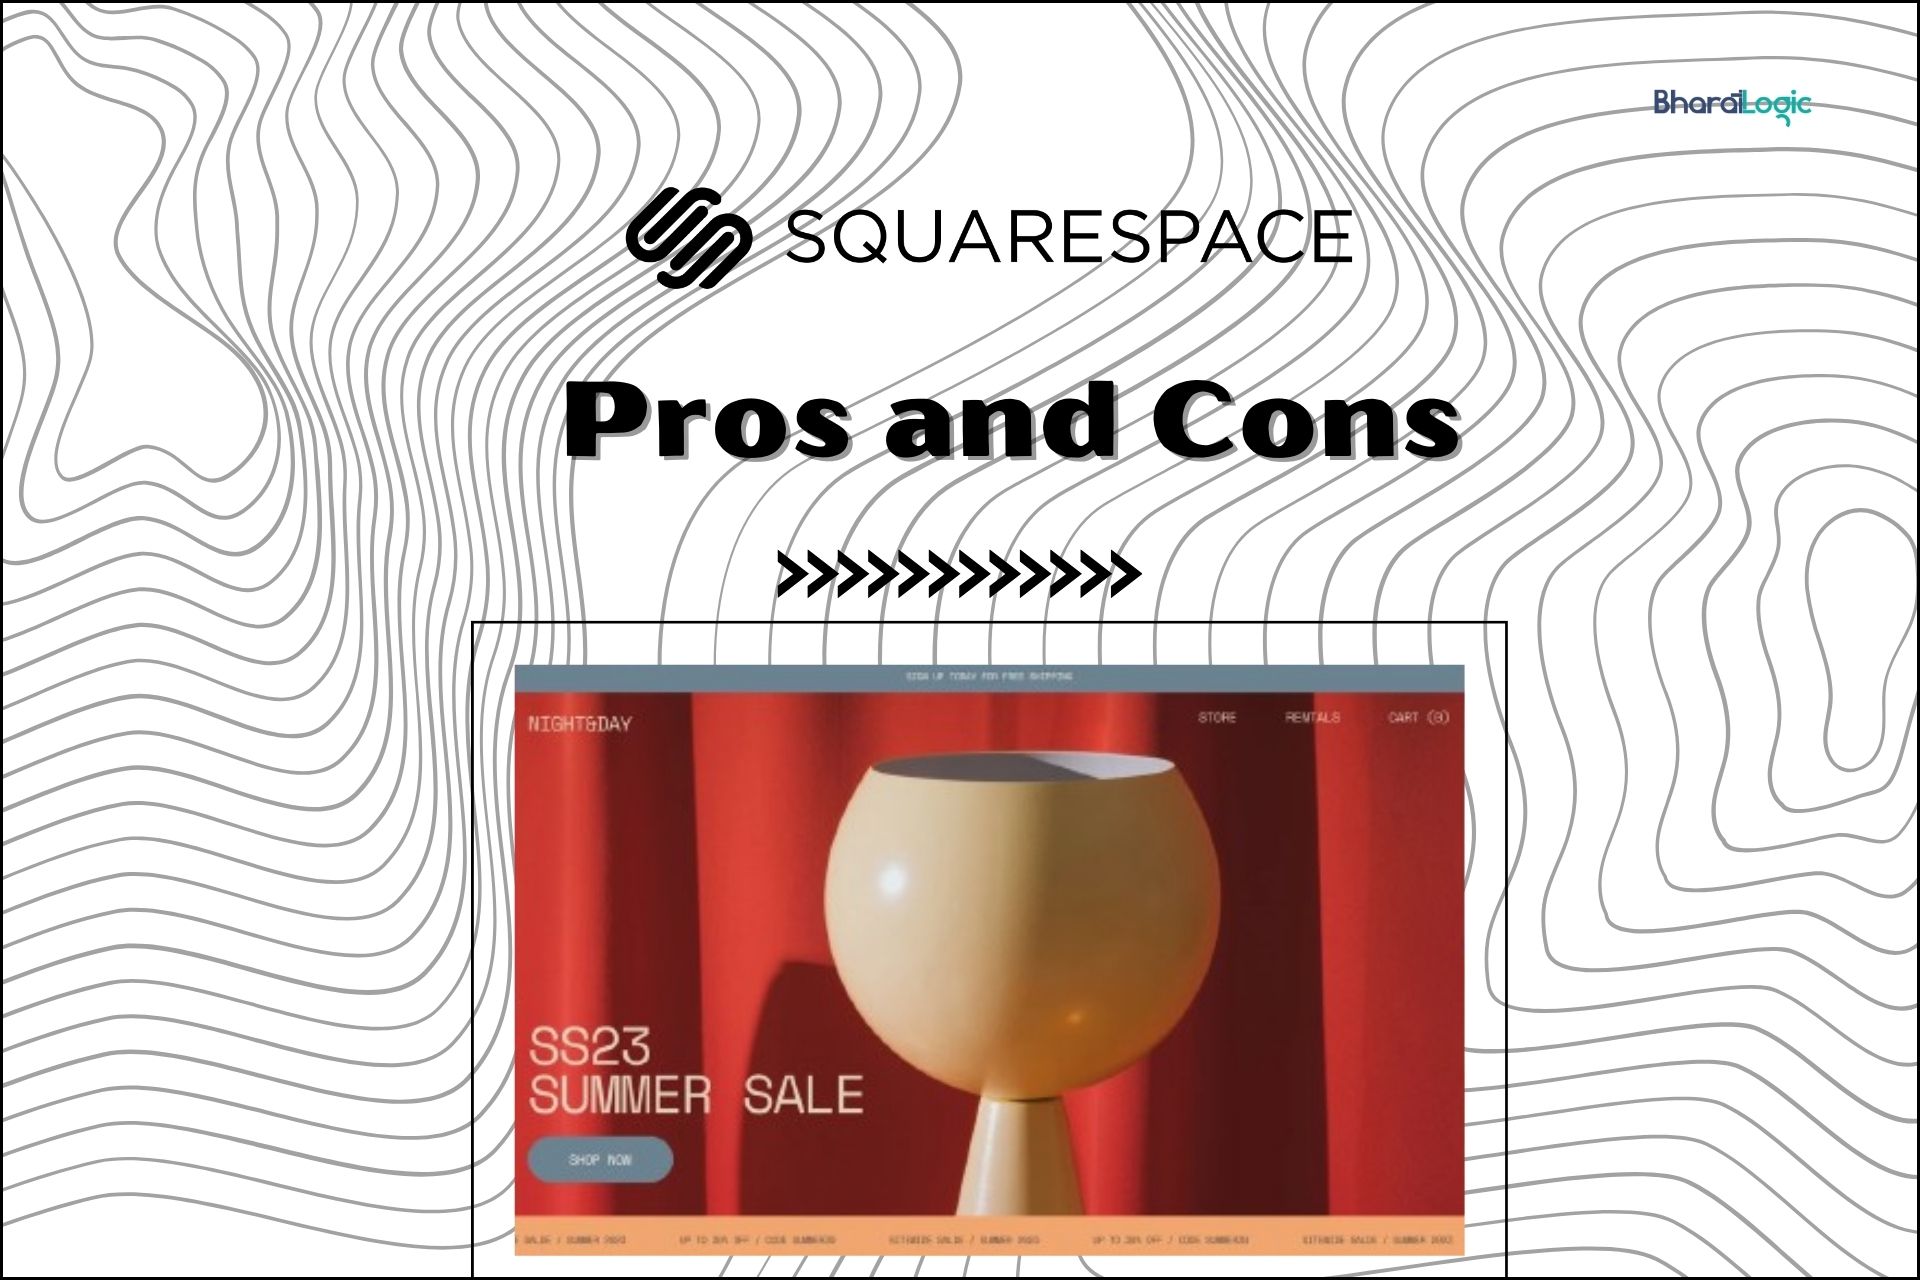 pros and cons of squarespace